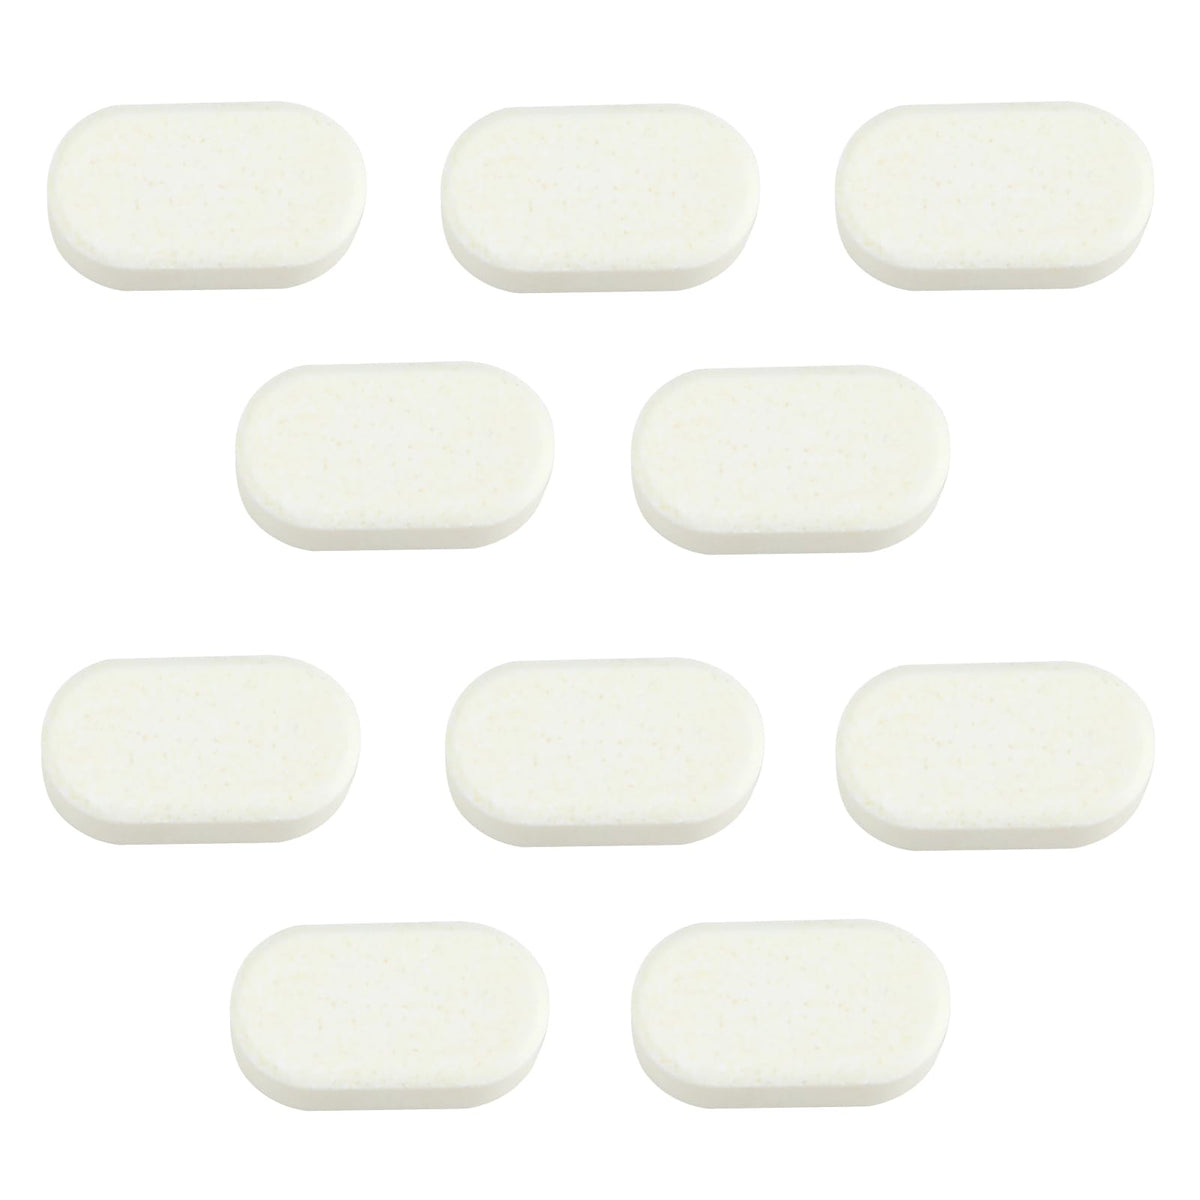 10 Pcs Scent Foaming Hand Soap Refill Tablets, Eco-friendly Effervescent Liquid Soap Tabs for Kitchen Bathroom, Plastic Free Wash Pods Sustainable Hand Foam Wash Refill Tablets (FLOWERS Scent)